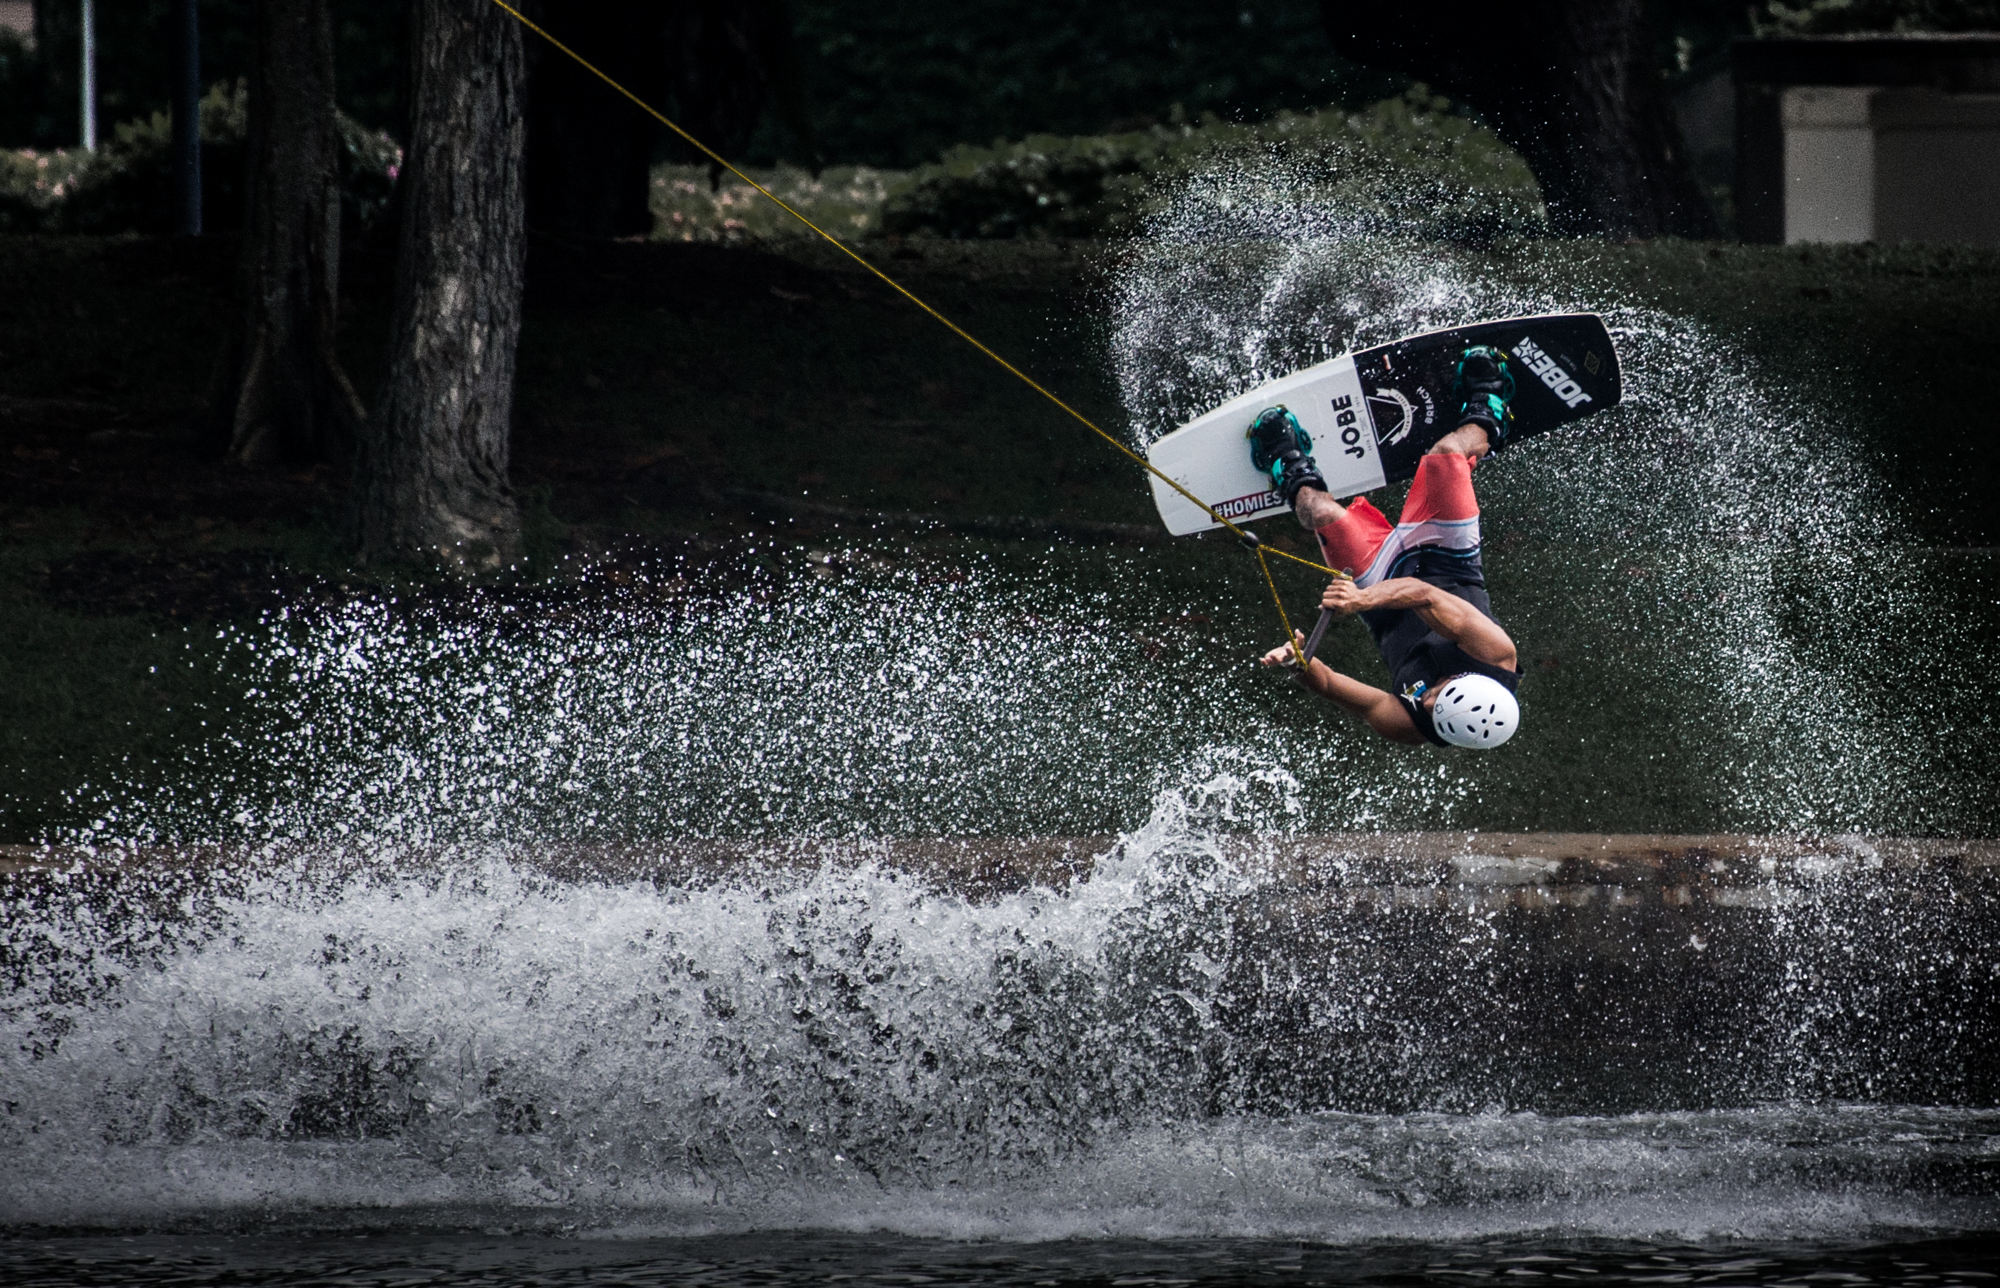 A wake boarder jumps in training at the Singapore Wake Park.